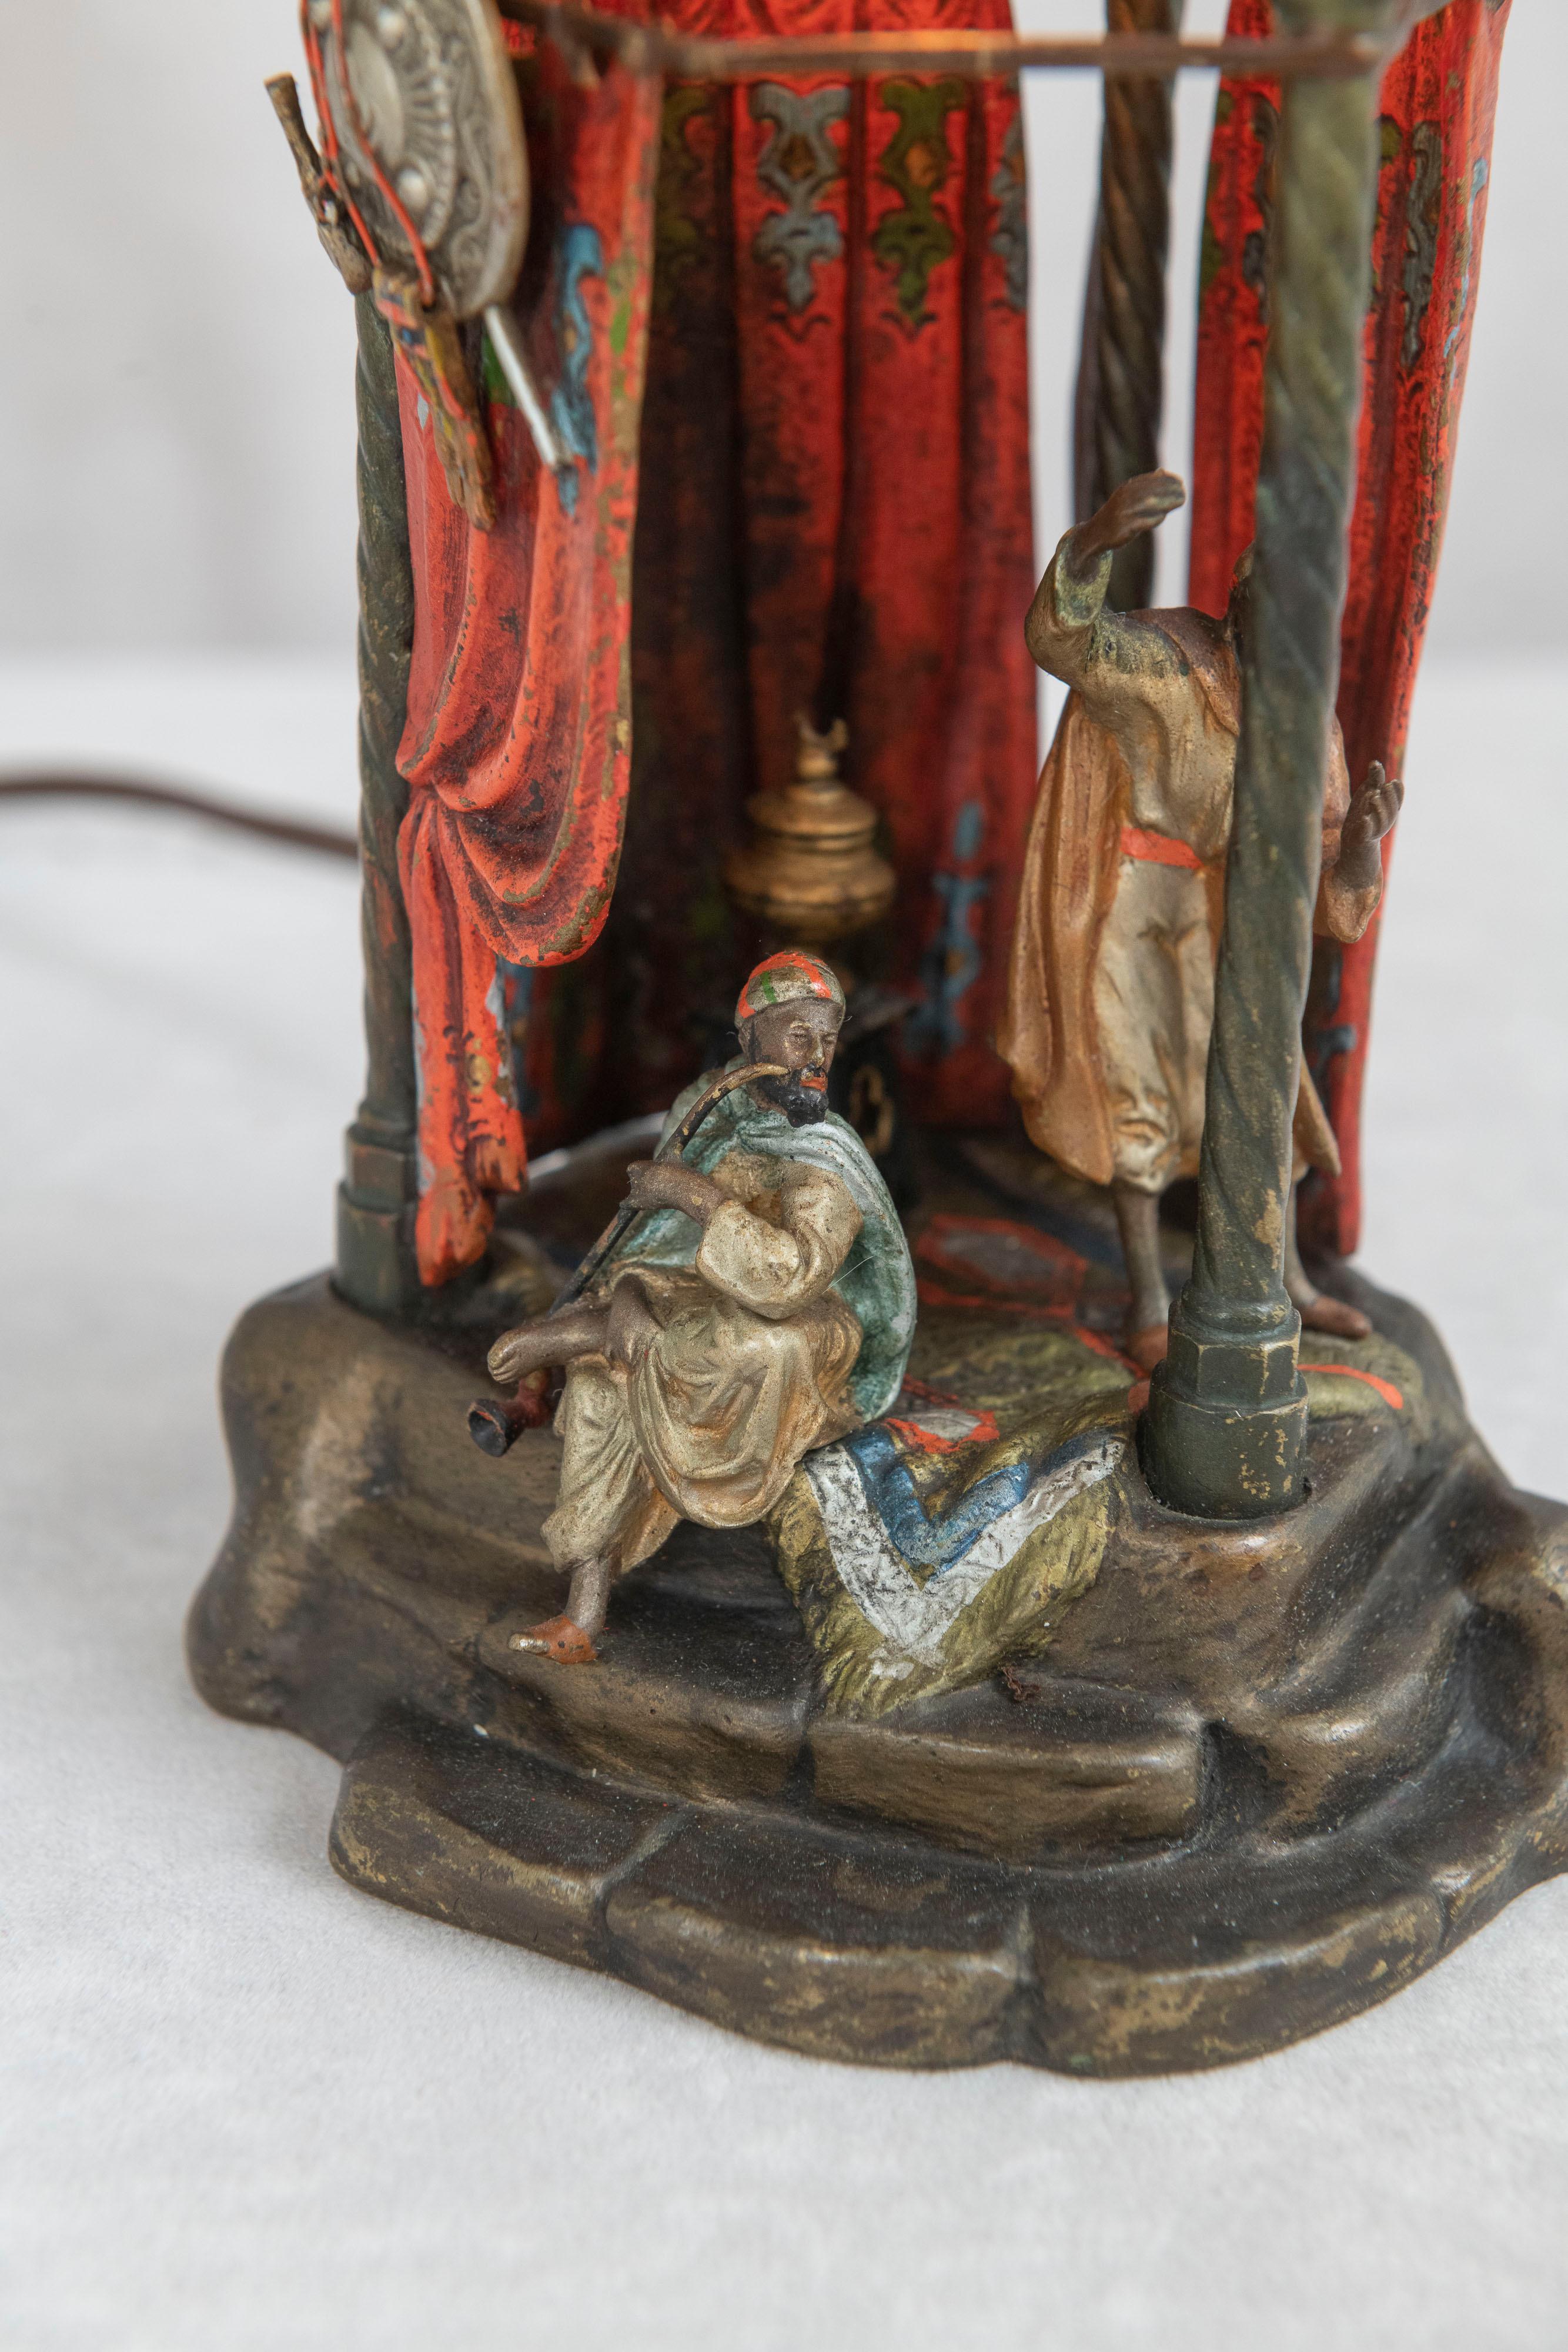 This charming little scene depicted here is so colorful and detailed that it could only have been executed by the premier maker of these bronzes, Franz Bergmann. It does bear his signature with the letter 